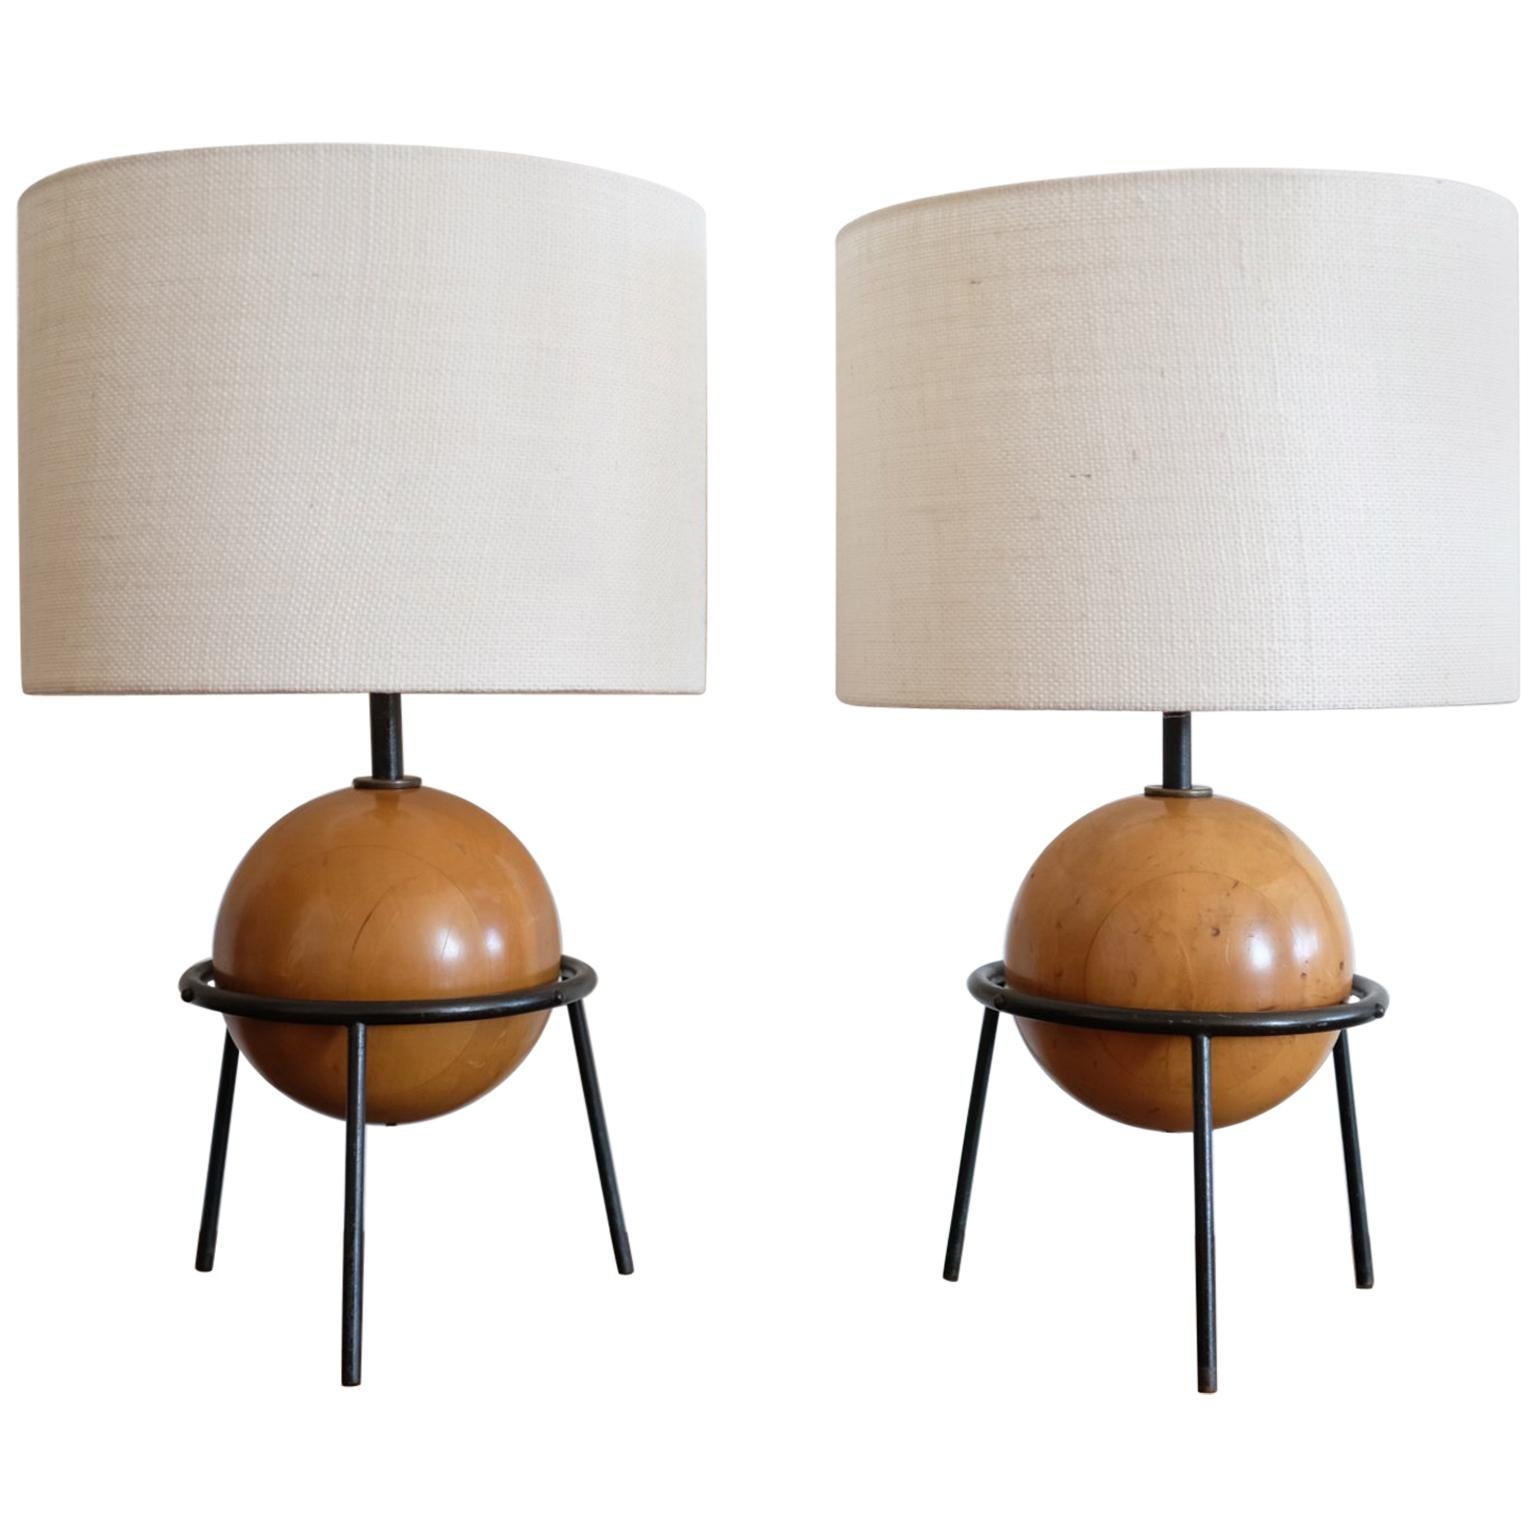 California Modern Iron and Wood Lamps by Albert Blake, 1951 For Sale